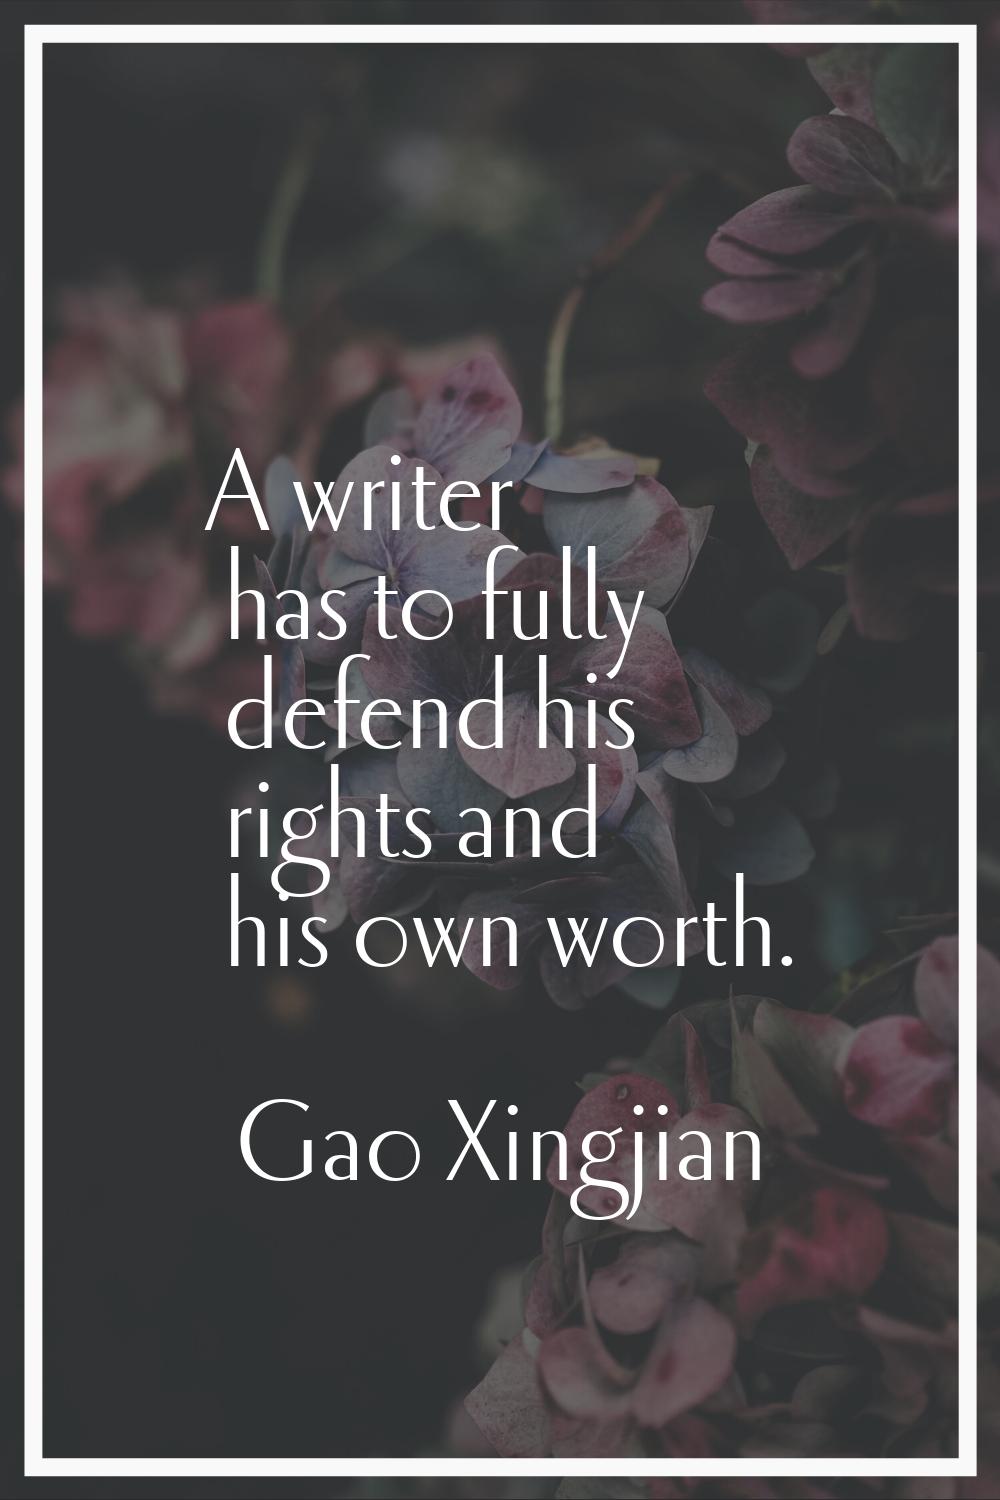 A writer has to fully defend his rights and his own worth.